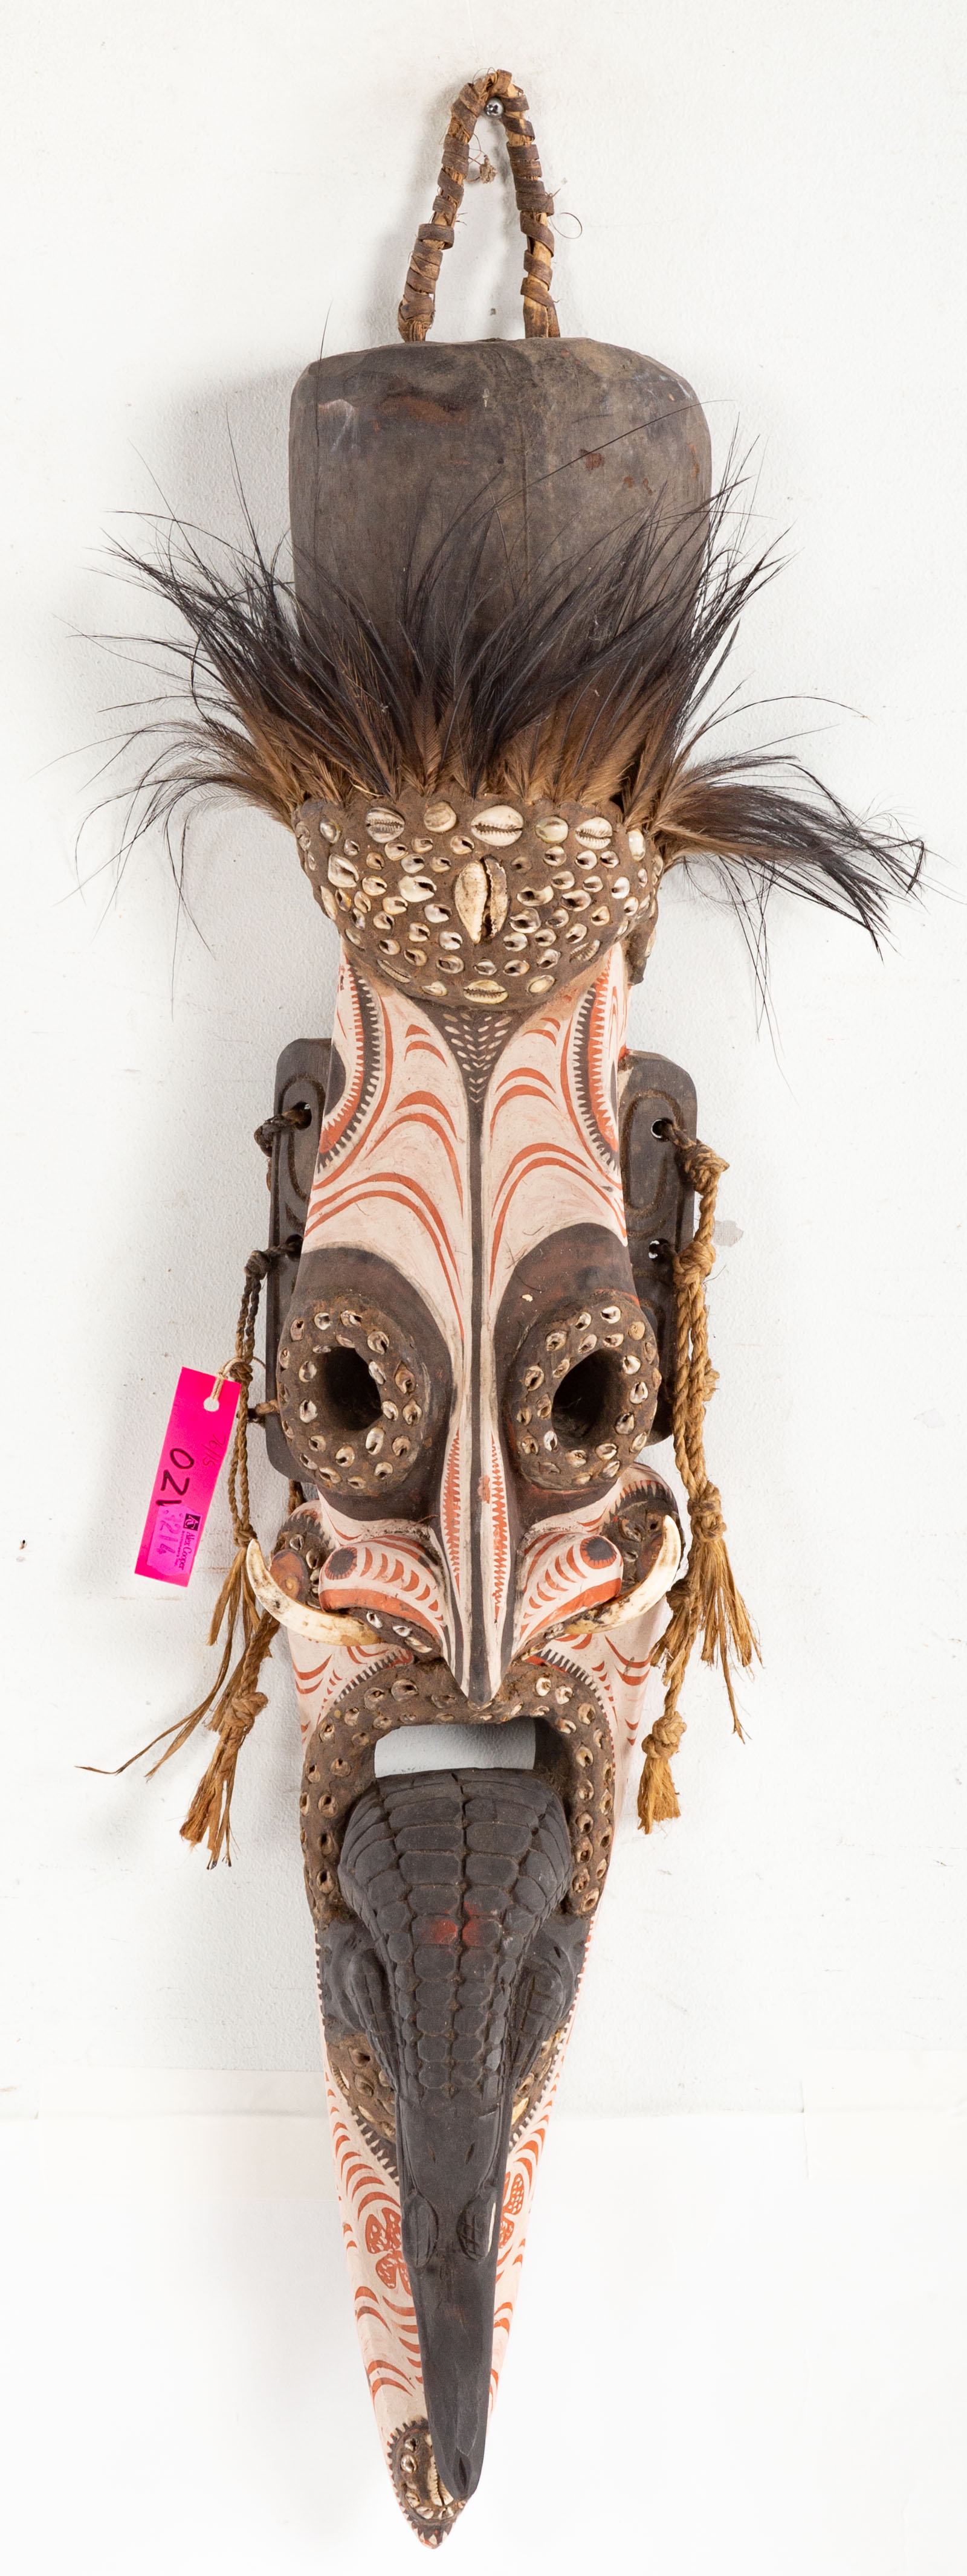 NEW GUINEA CARVED MASK Carved and